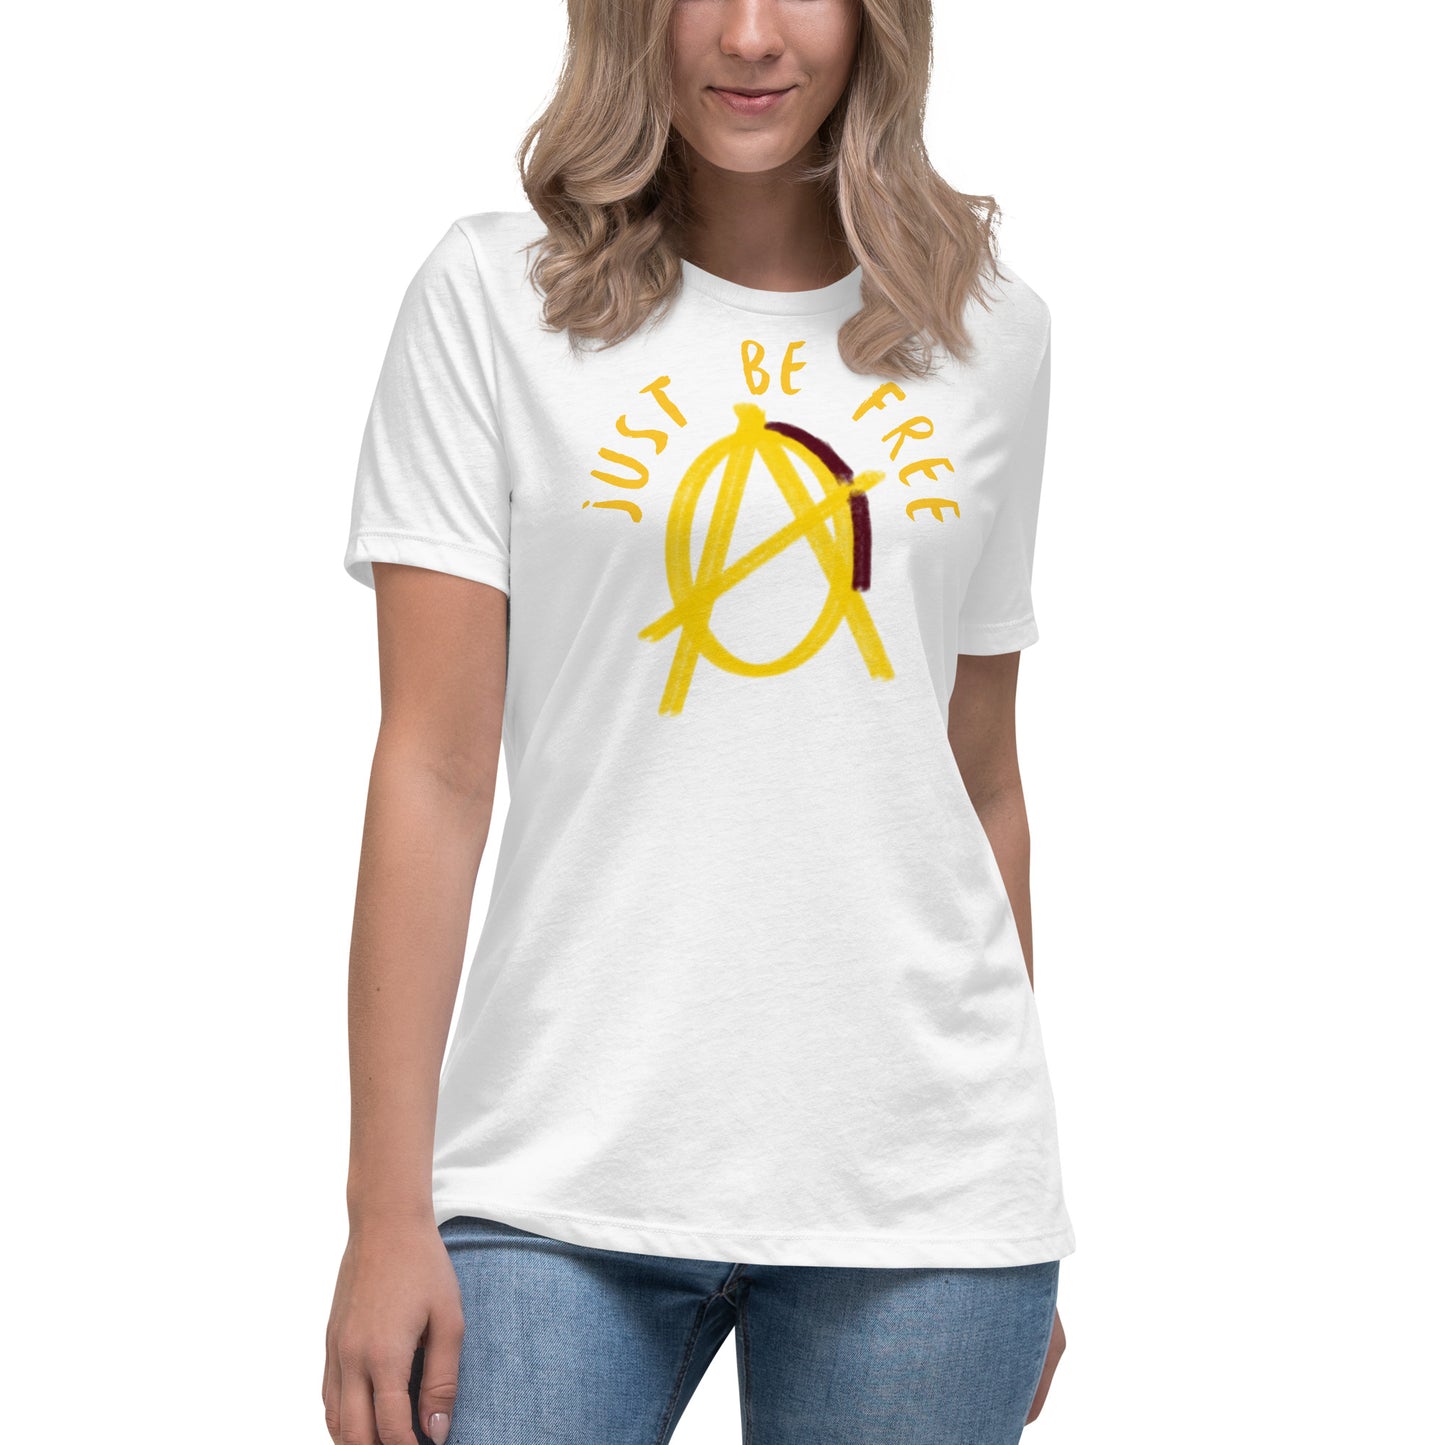 Anarchy Wear "Just Be Free" Women's Relaxed T-Shirt